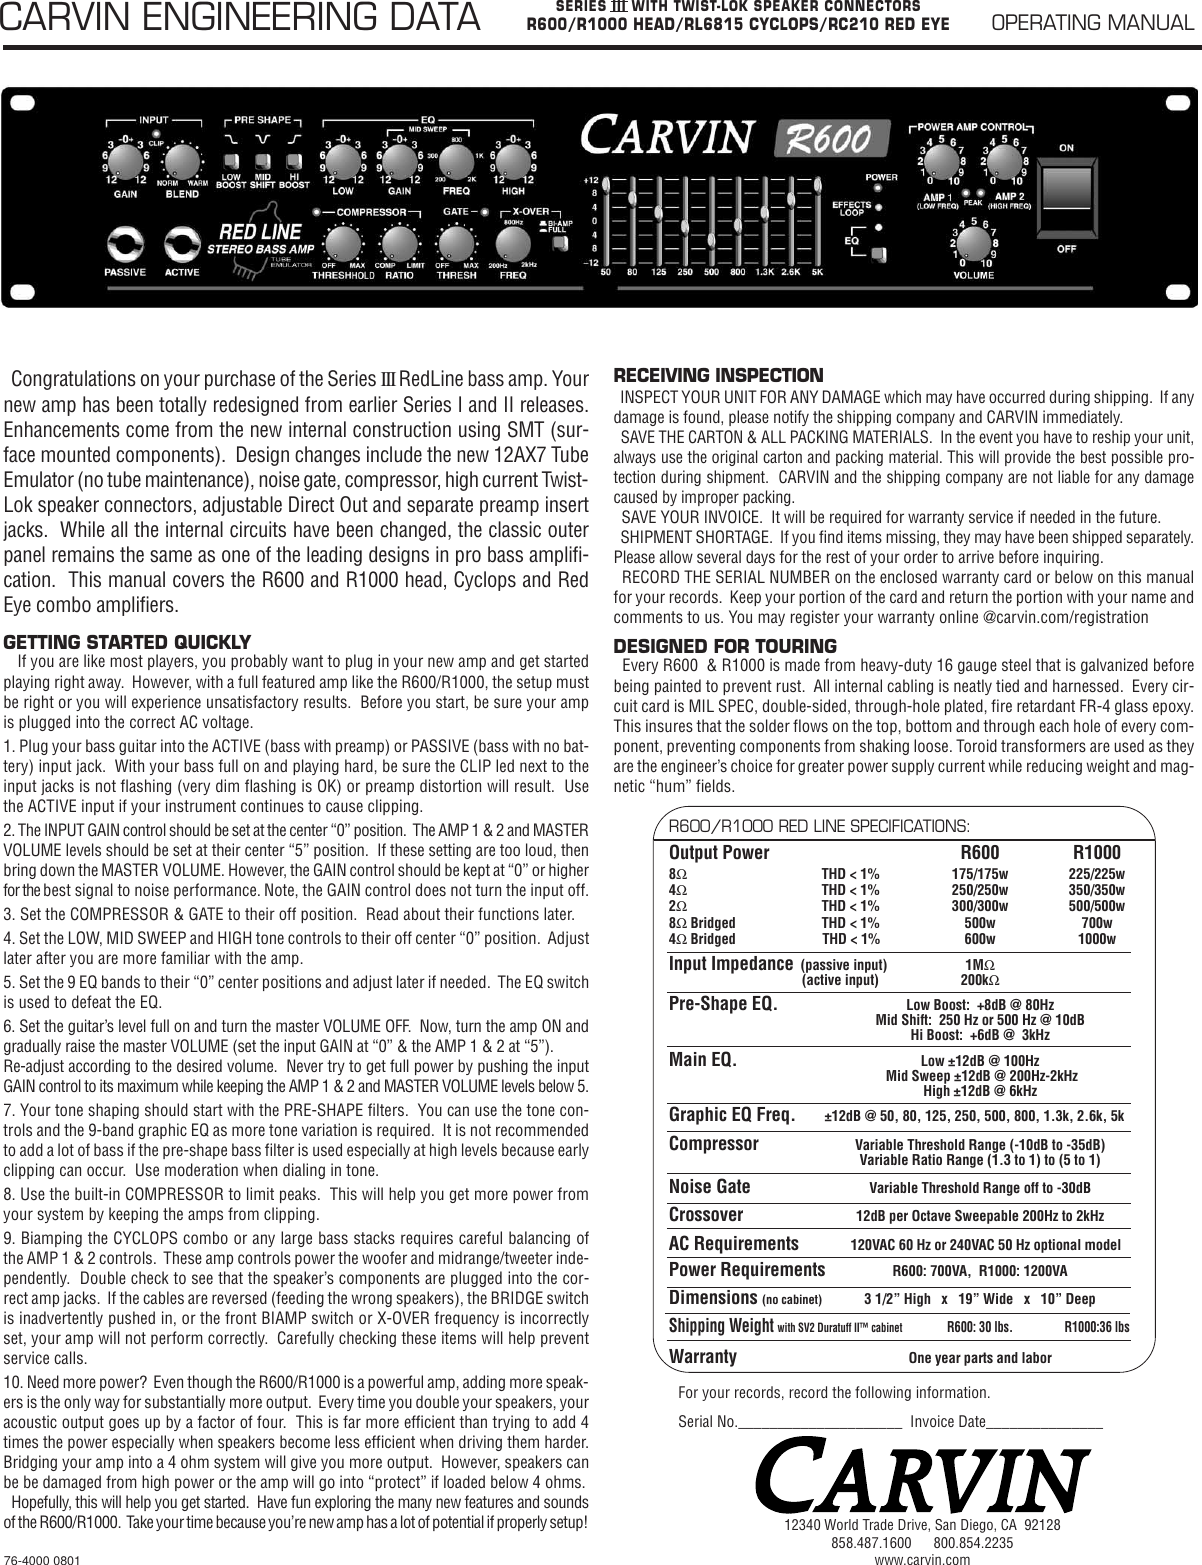 Page 1 of 4 - Carvin Carvin-R600-Series-Iii-Owners-Manual R600_R1000-08/01-web.qx